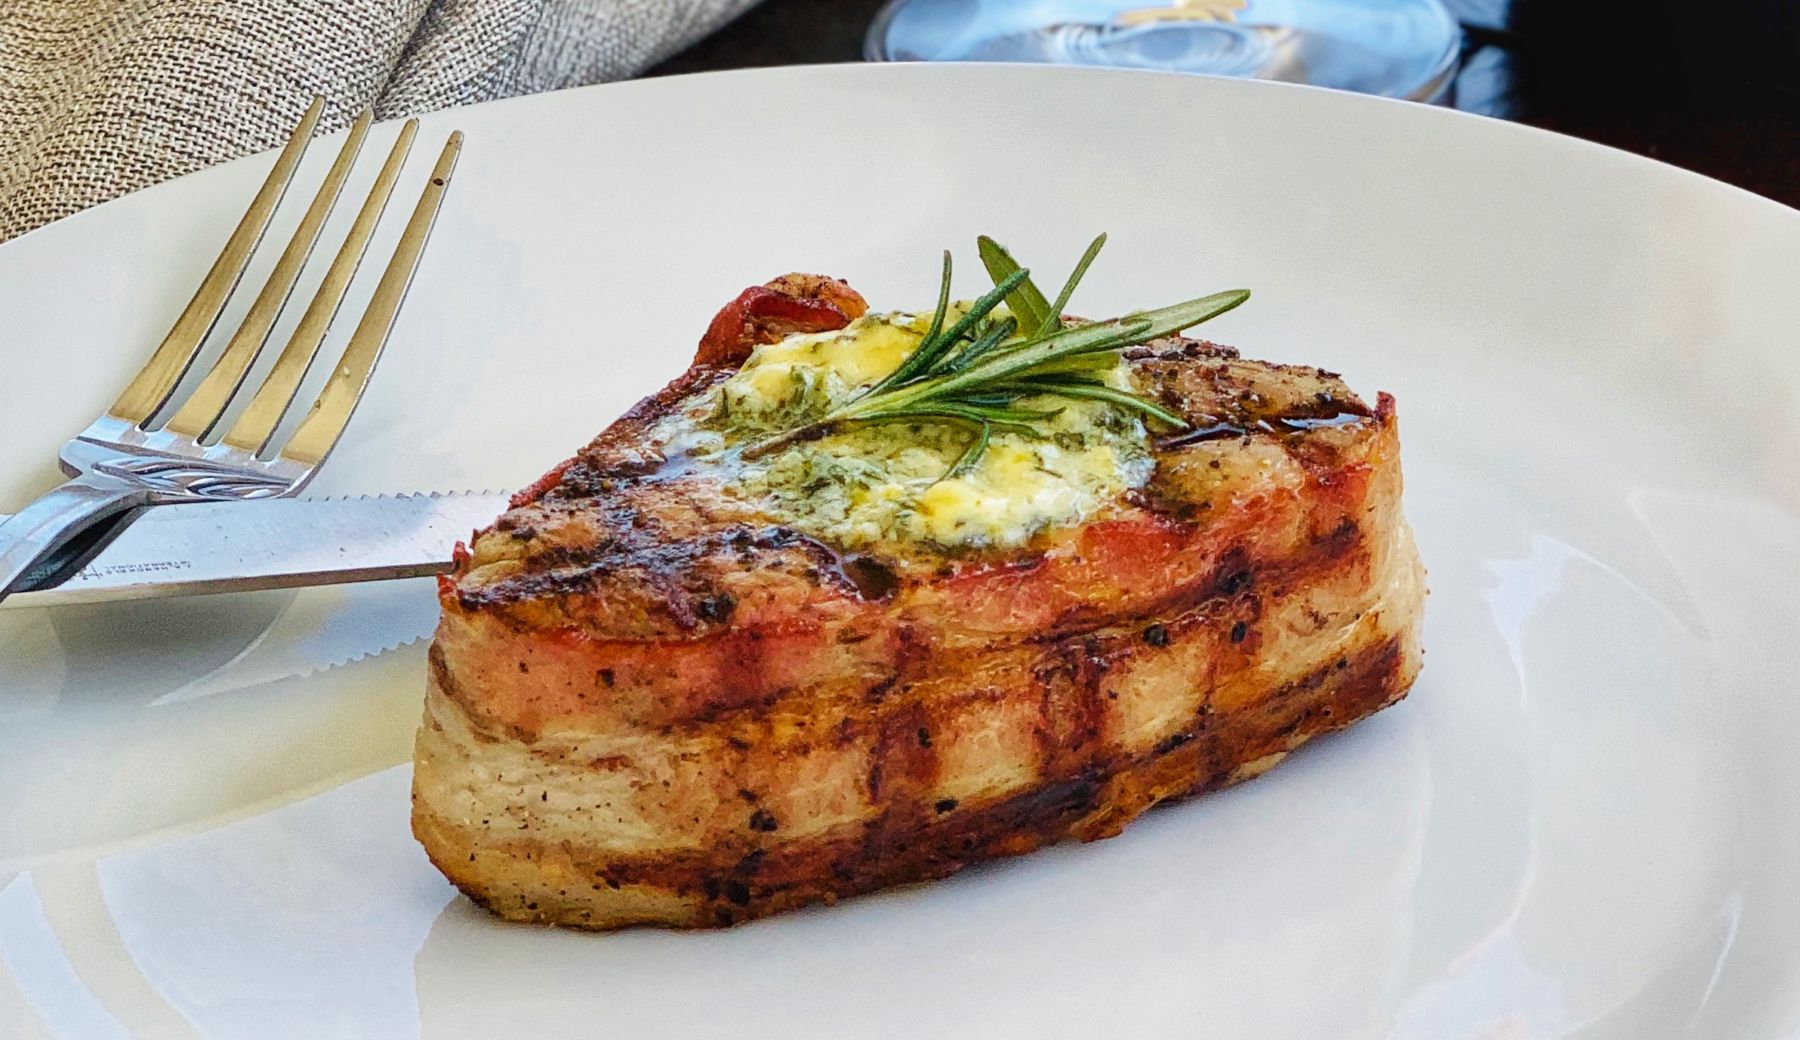 Bacon-wrapped Filet Mignon with Herb Lemon Butter